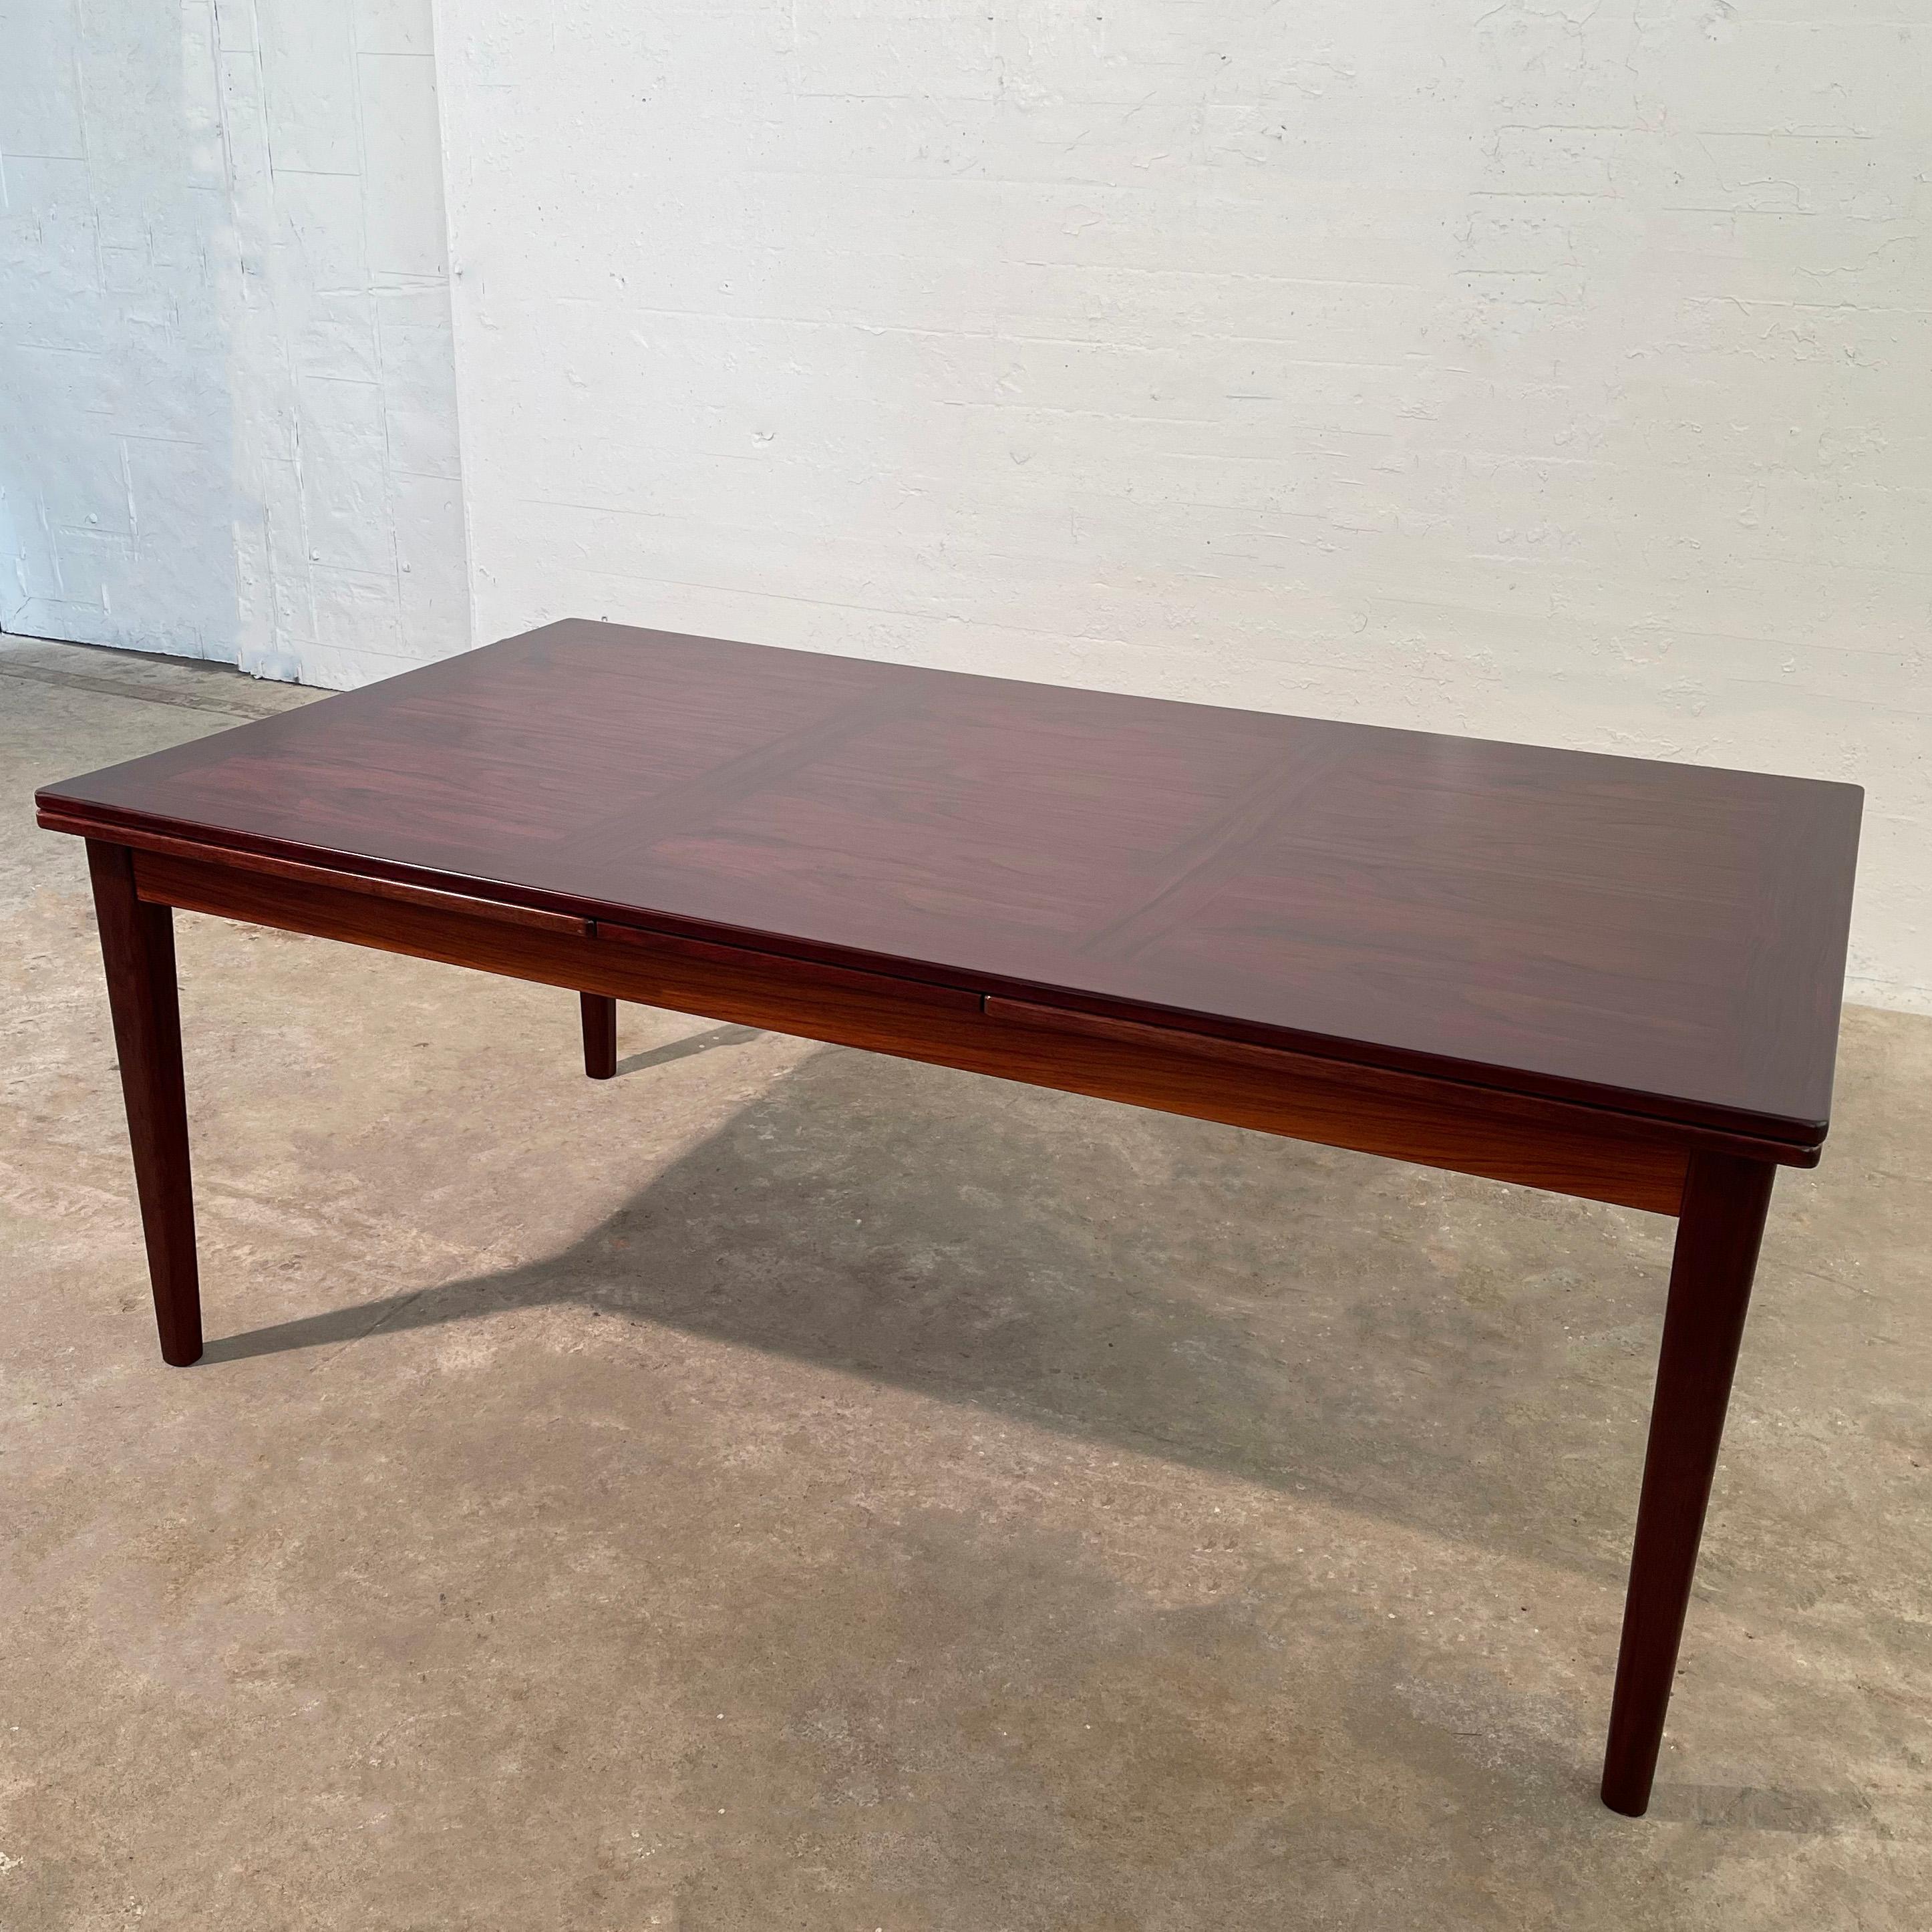 Scandinavian Modern Rosewood Extension Dining Table By Scovby Mobelfabrik In Good Condition For Sale In Brooklyn, NY